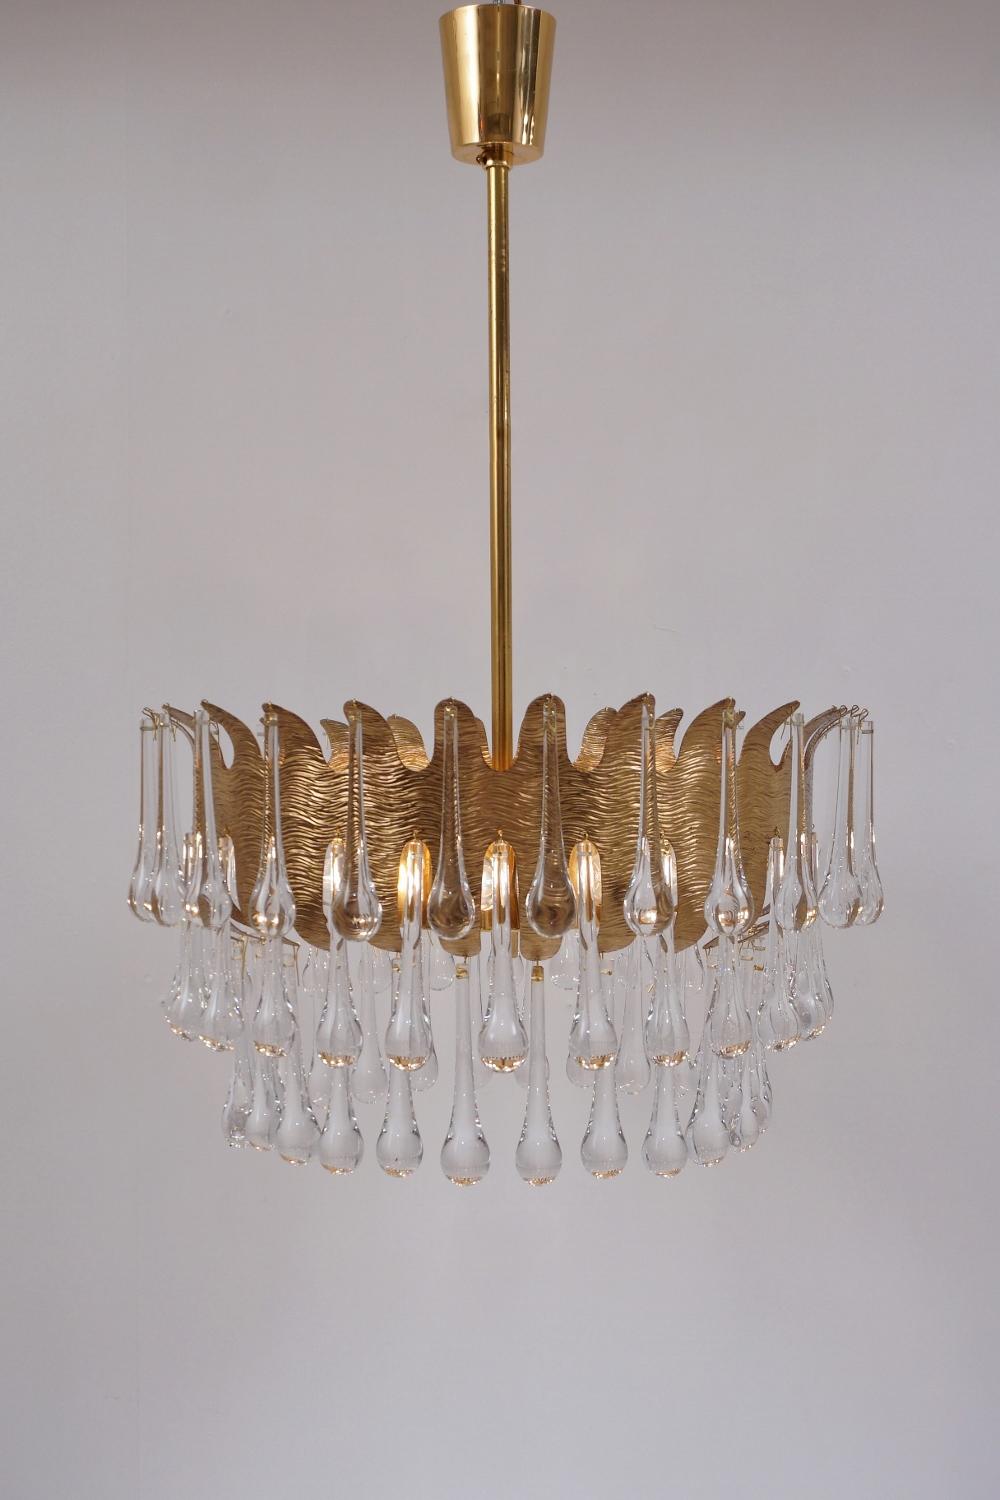 Palwa Chandelier Gold Plated Gilt Brass and Crystal by Ernst Palme, 1960s German For Sale 1